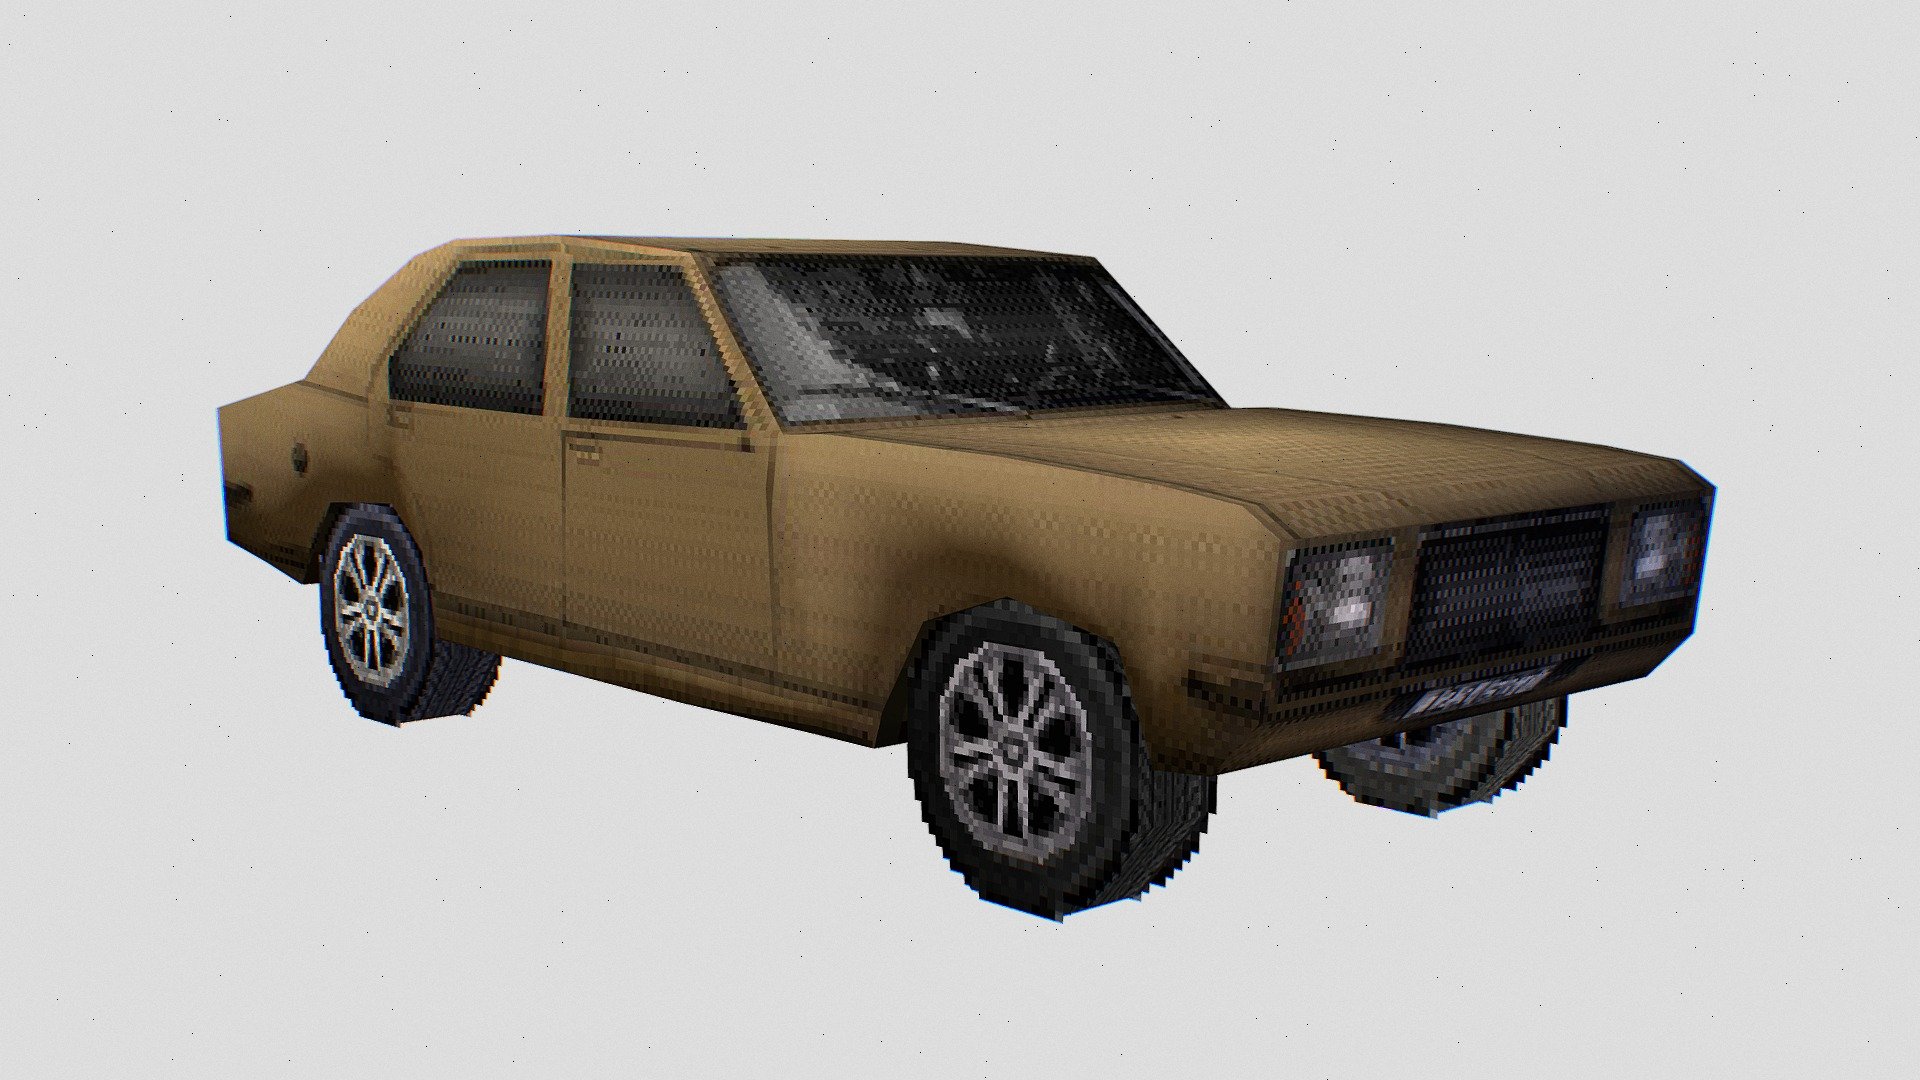 My custom designed generic car

Designed for retro inspired projects or mobile games.

My YouTube channel where I document my game dev journey - https://www.youtube.com/@AaronMYoung
Contact me on - Aaronmyoung94@gmail.com - PS1 Style Asset - Generic Car - 3D model by AaronMYoung 3d model